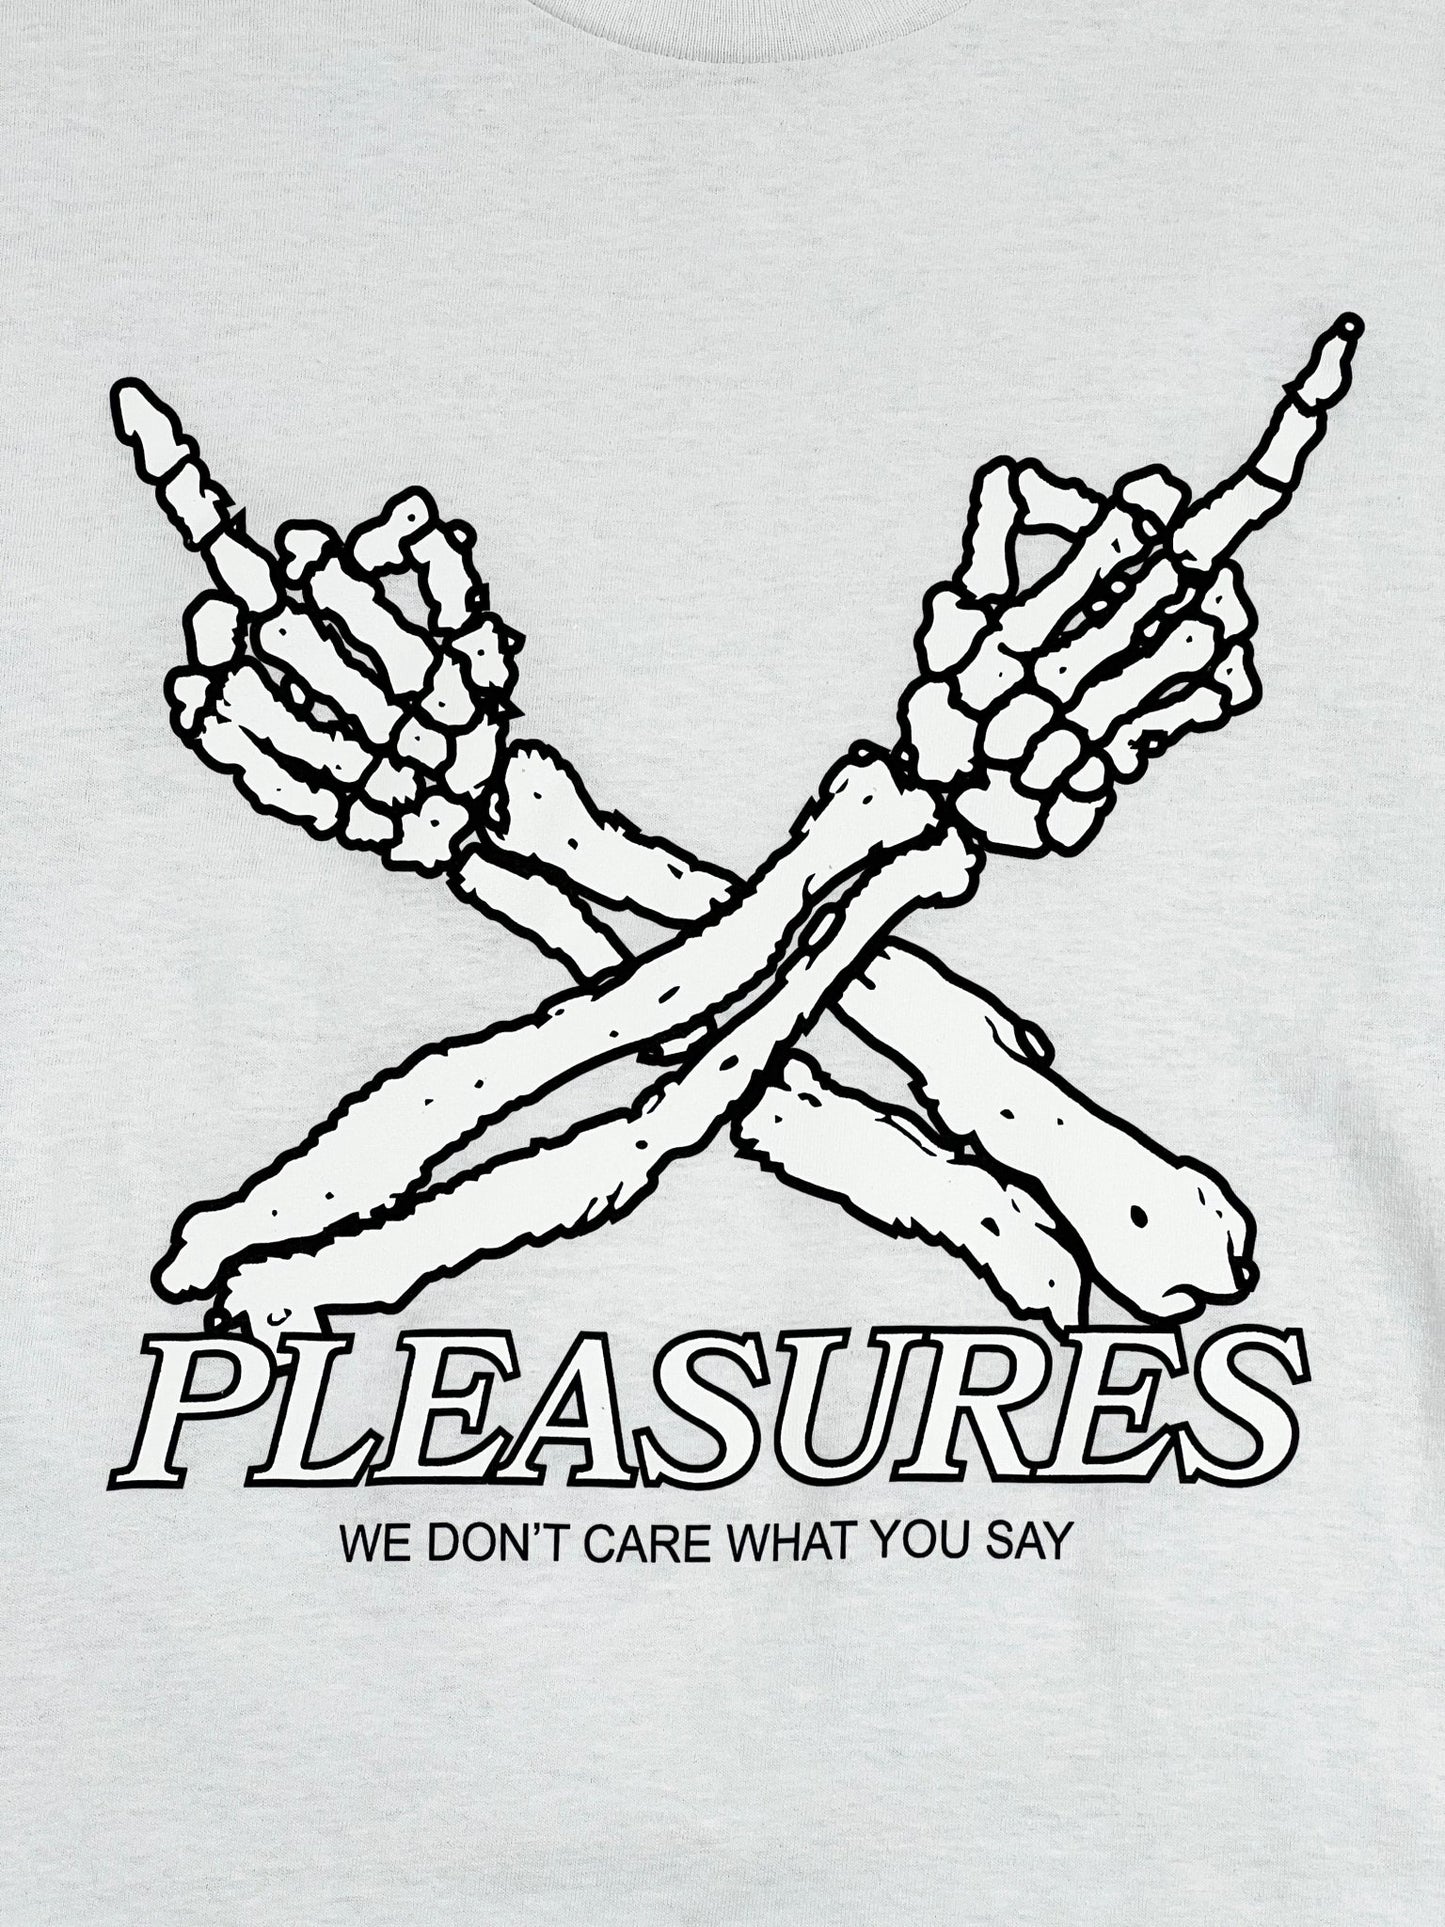 PLEASURES graphic t shirt: PLEASURES DON'T CARE T-SHIRT WHITE, crafted from comfortable cotton.